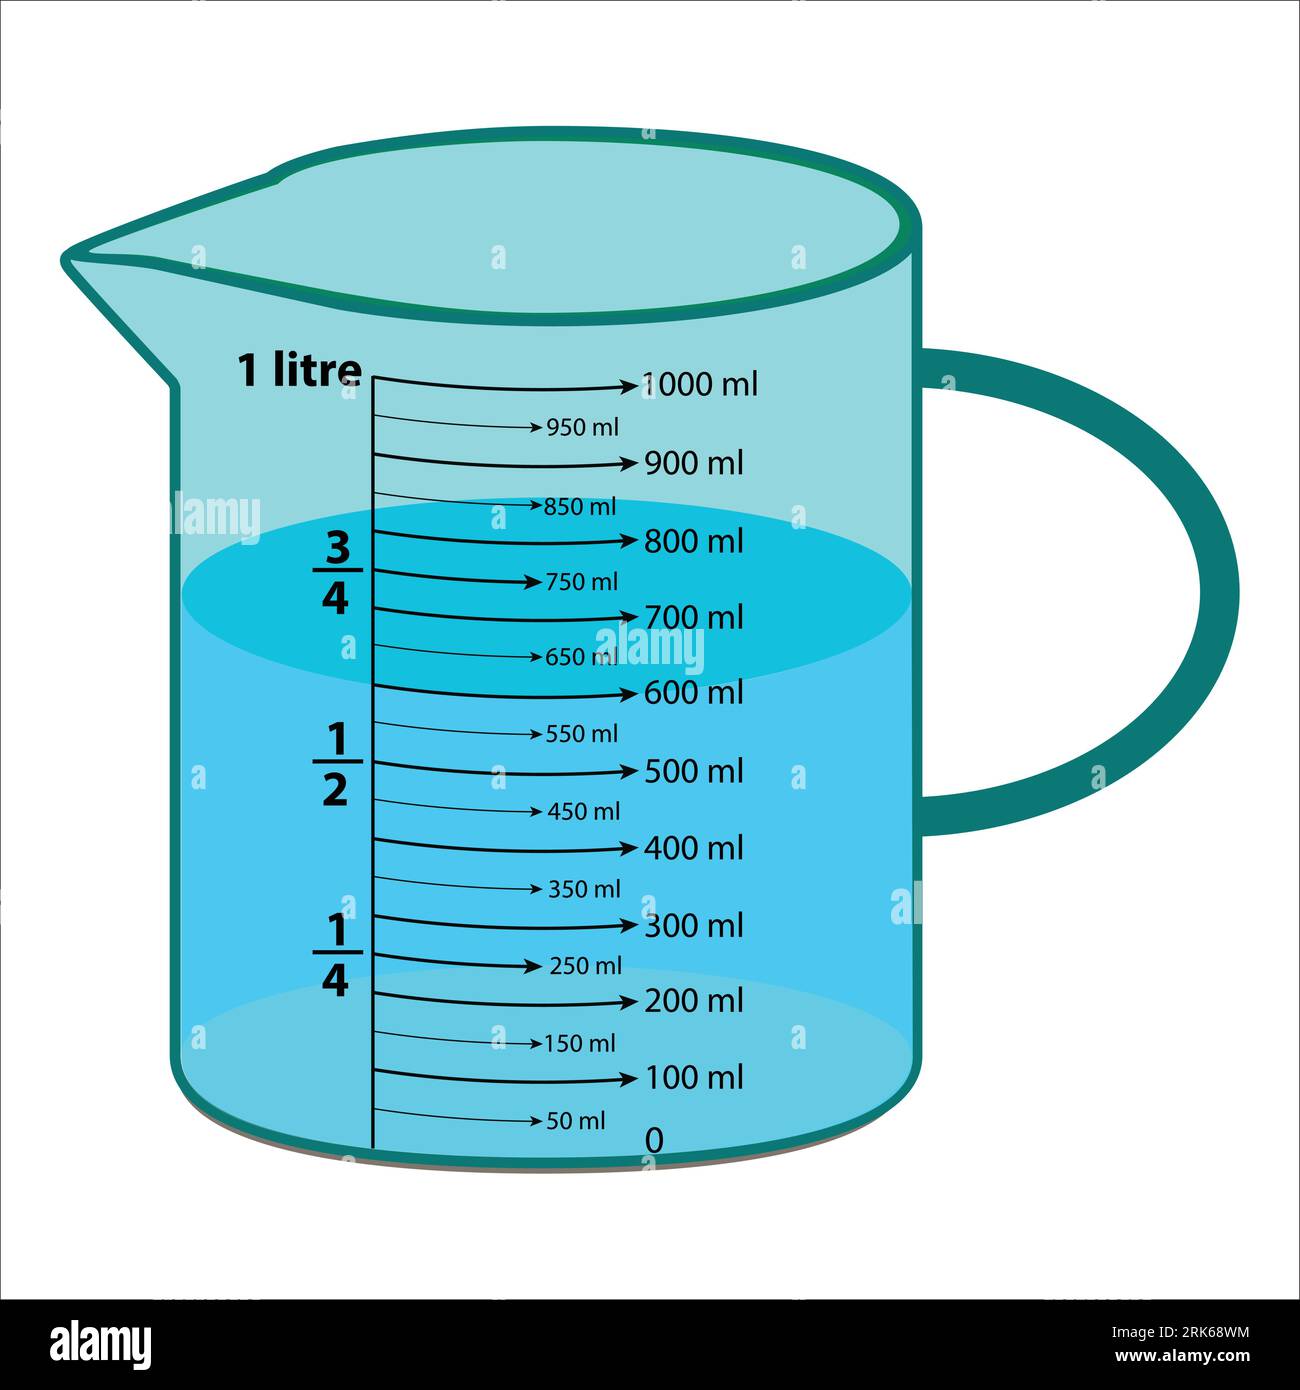 https://c8.alamy.com/comp/2RK68WM/the-scale-measuring-jug-600ml-with-measuring-scale-beaker-for-chemical-experiments-in-the-laboratory-vector-illustration-2RK68WM.jpg